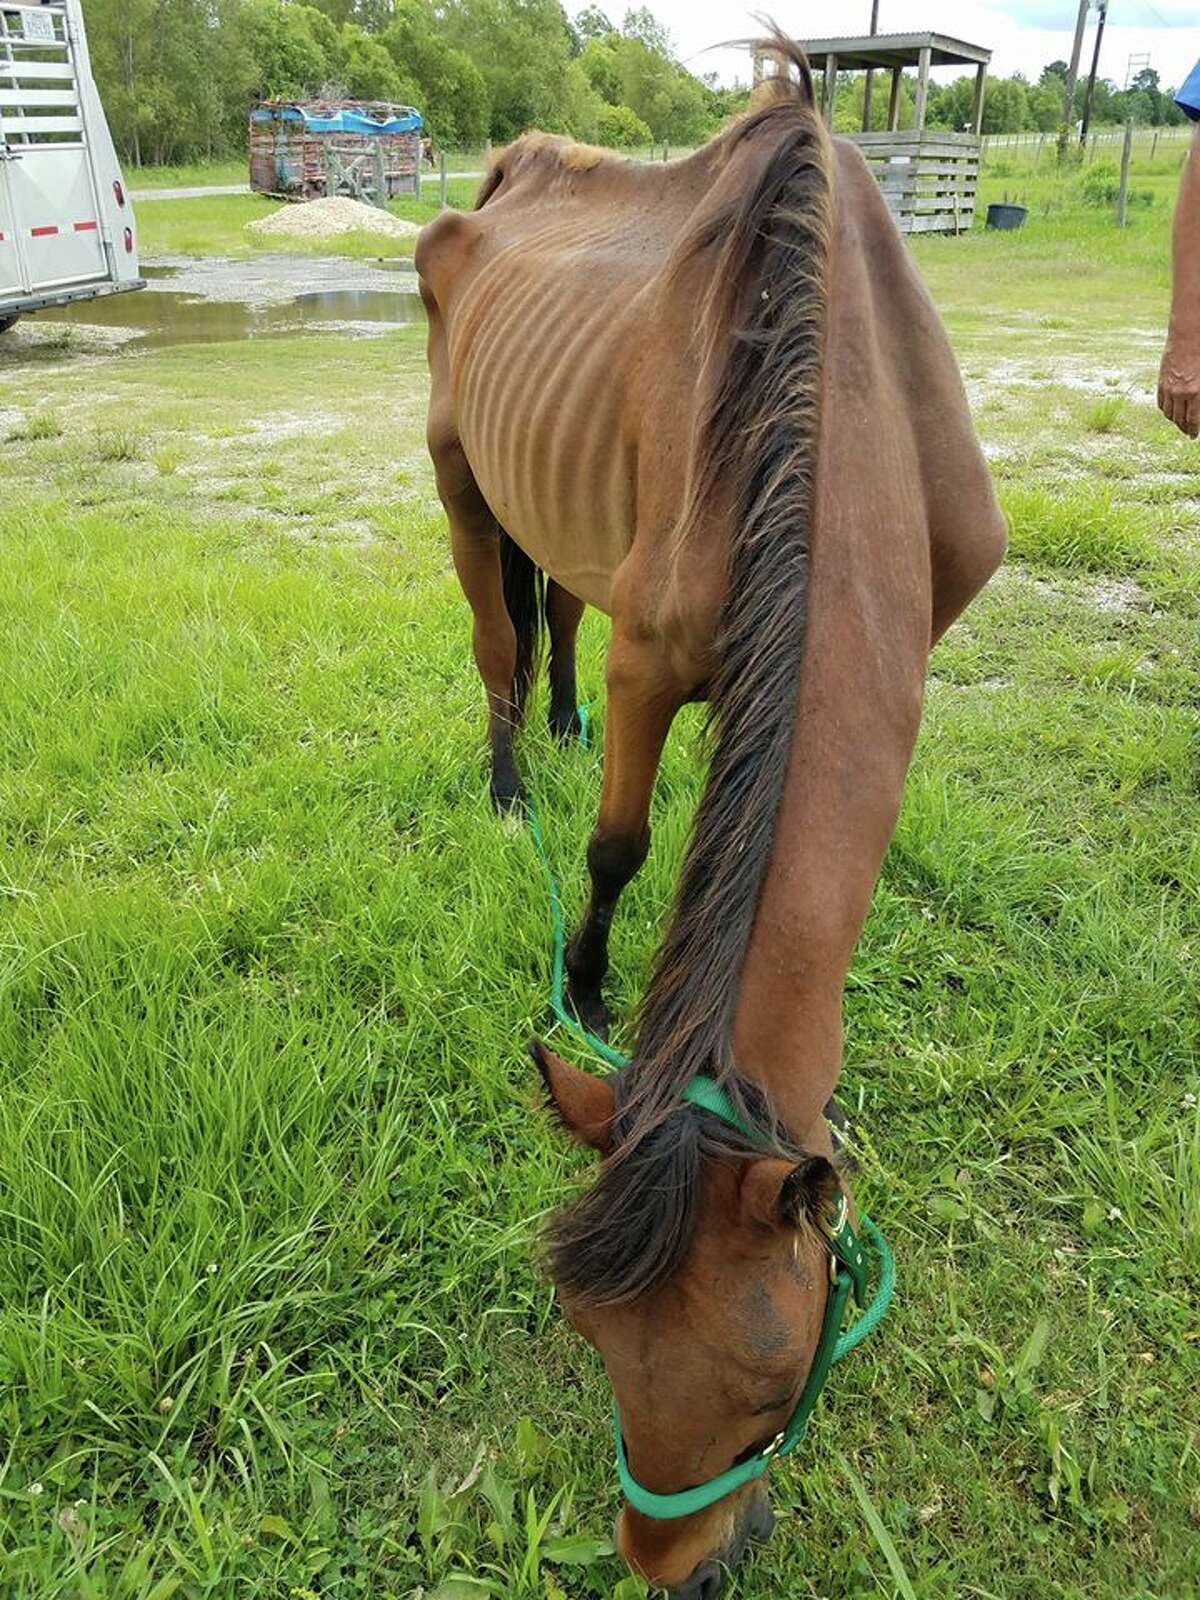 The Jefferson County Sheriff's Office is searching for the owner of this malnourished horse abandoned on the side of a road June 28, 2017.